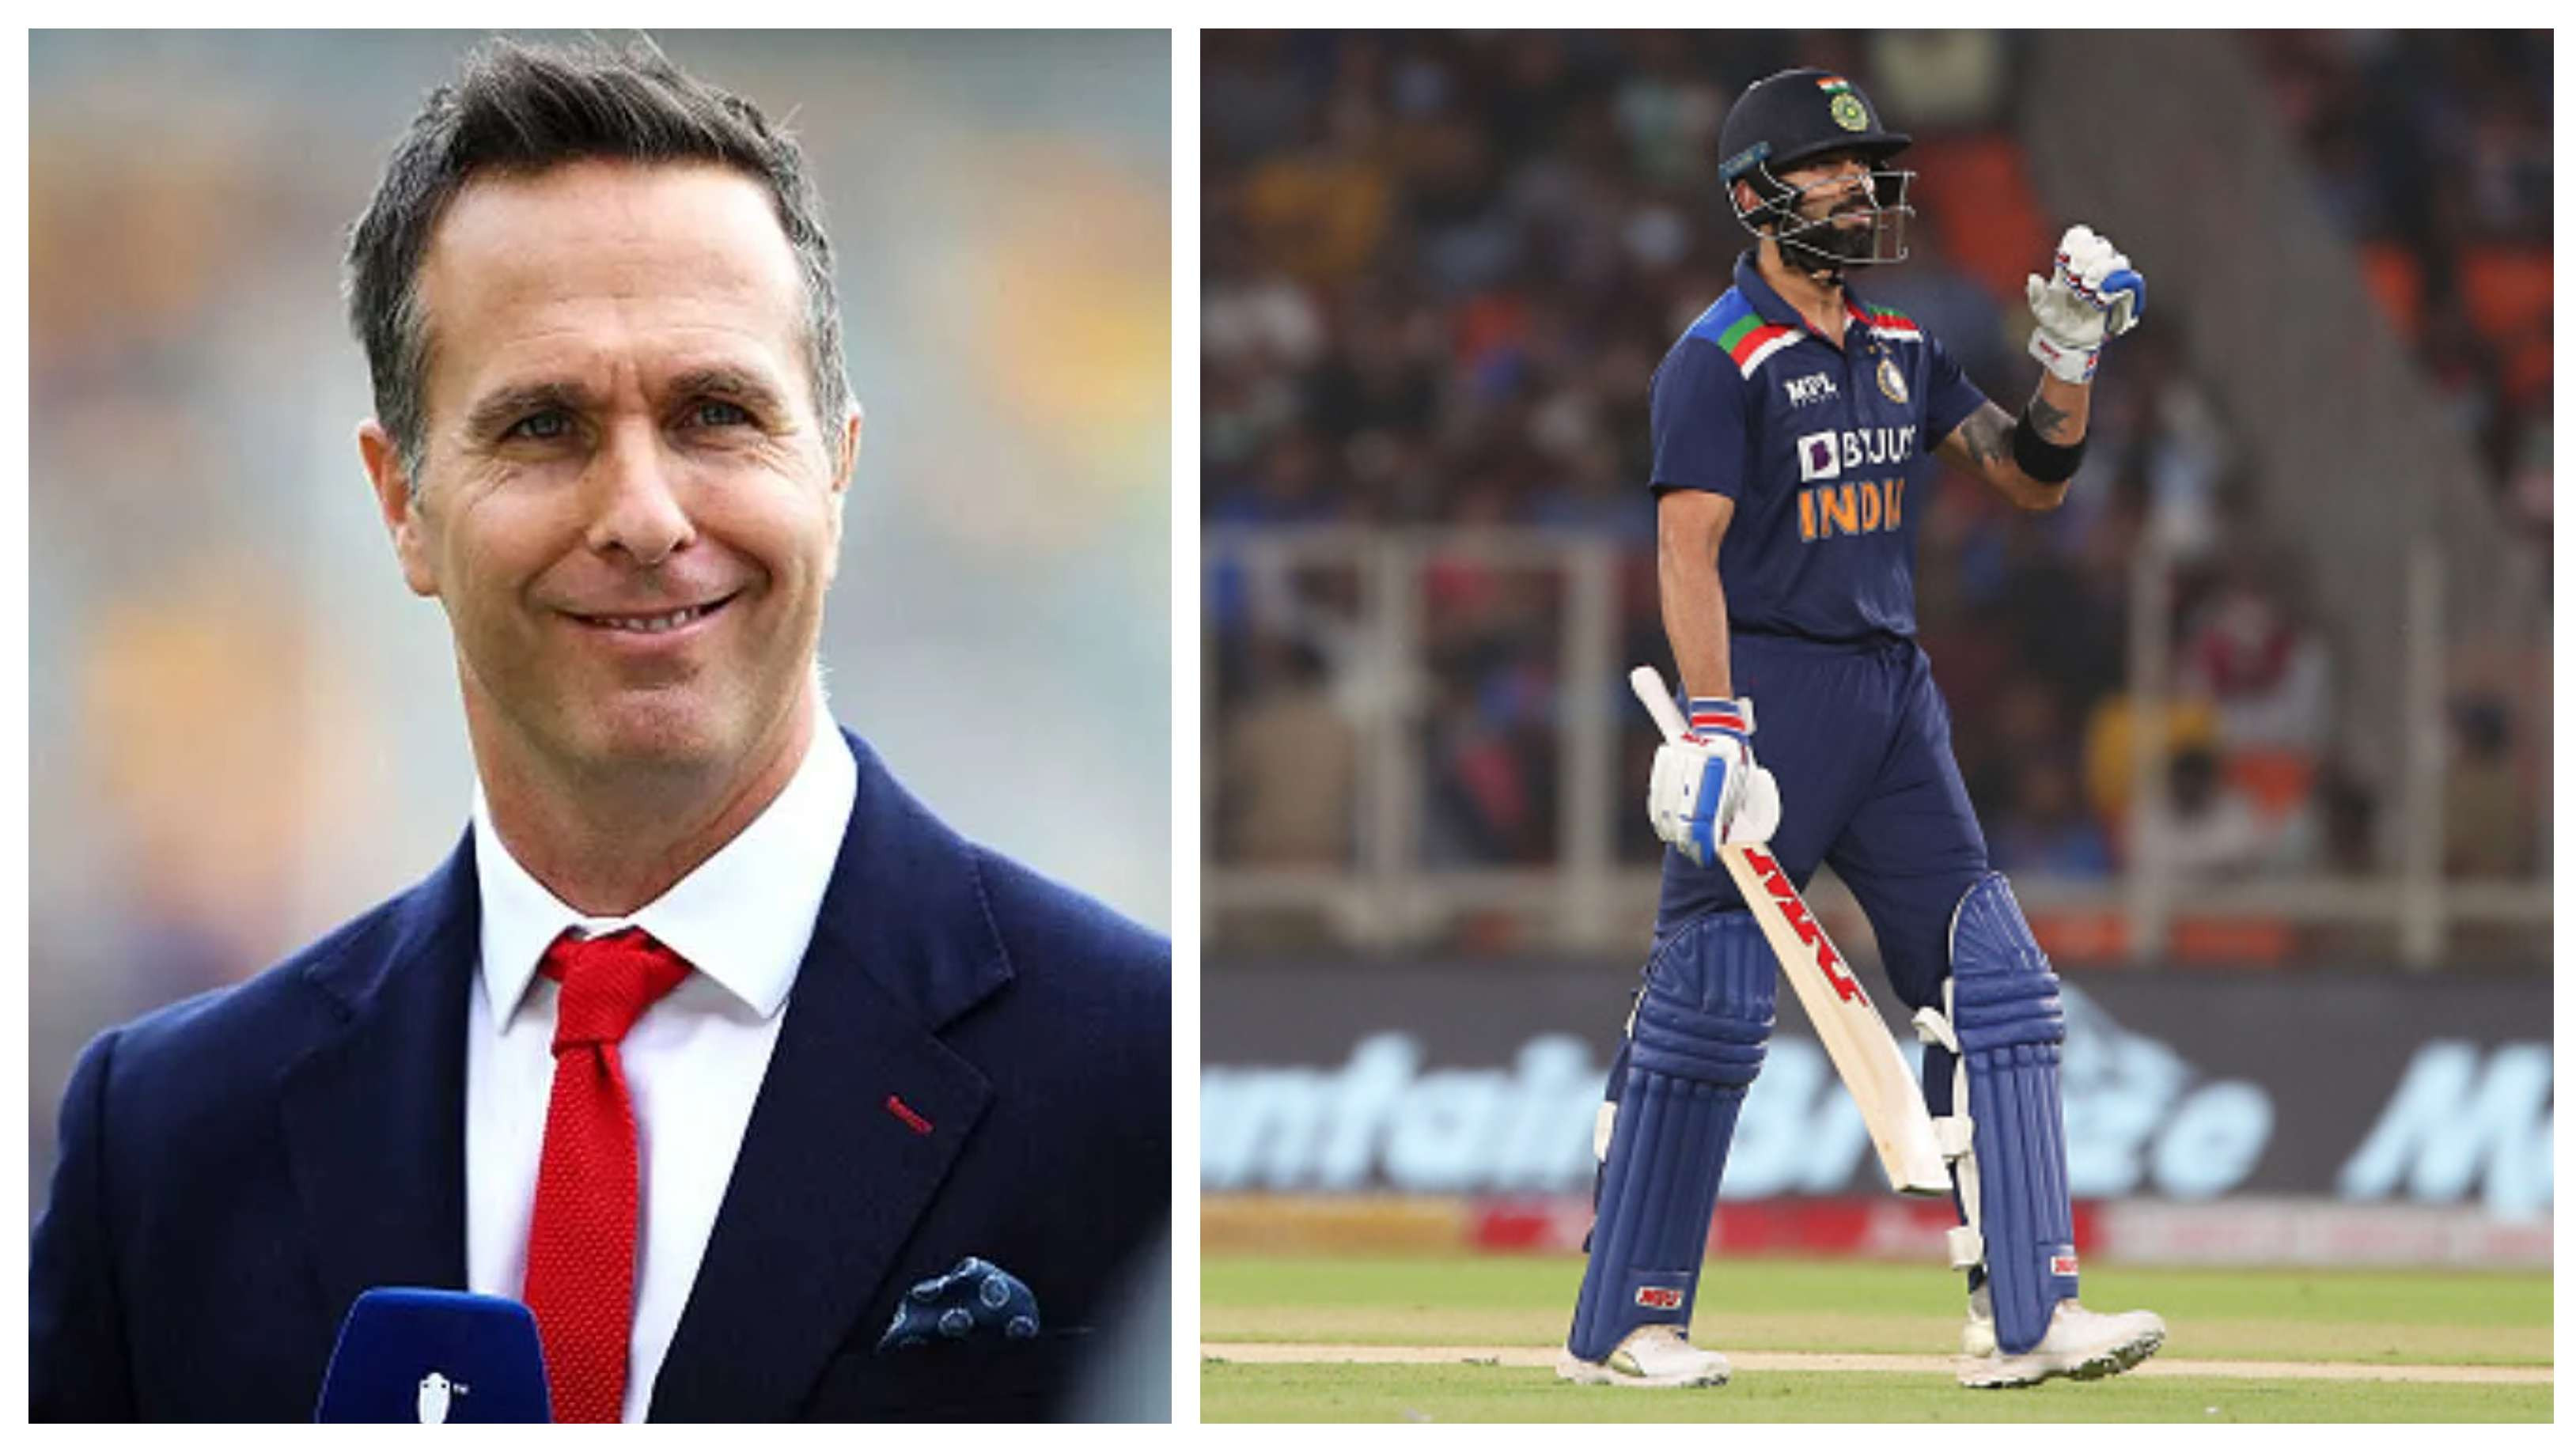 IND v ENG 2021: Michael Vaughan asks Virat Kohli to be a little selfish in the first few deliveries of his innings